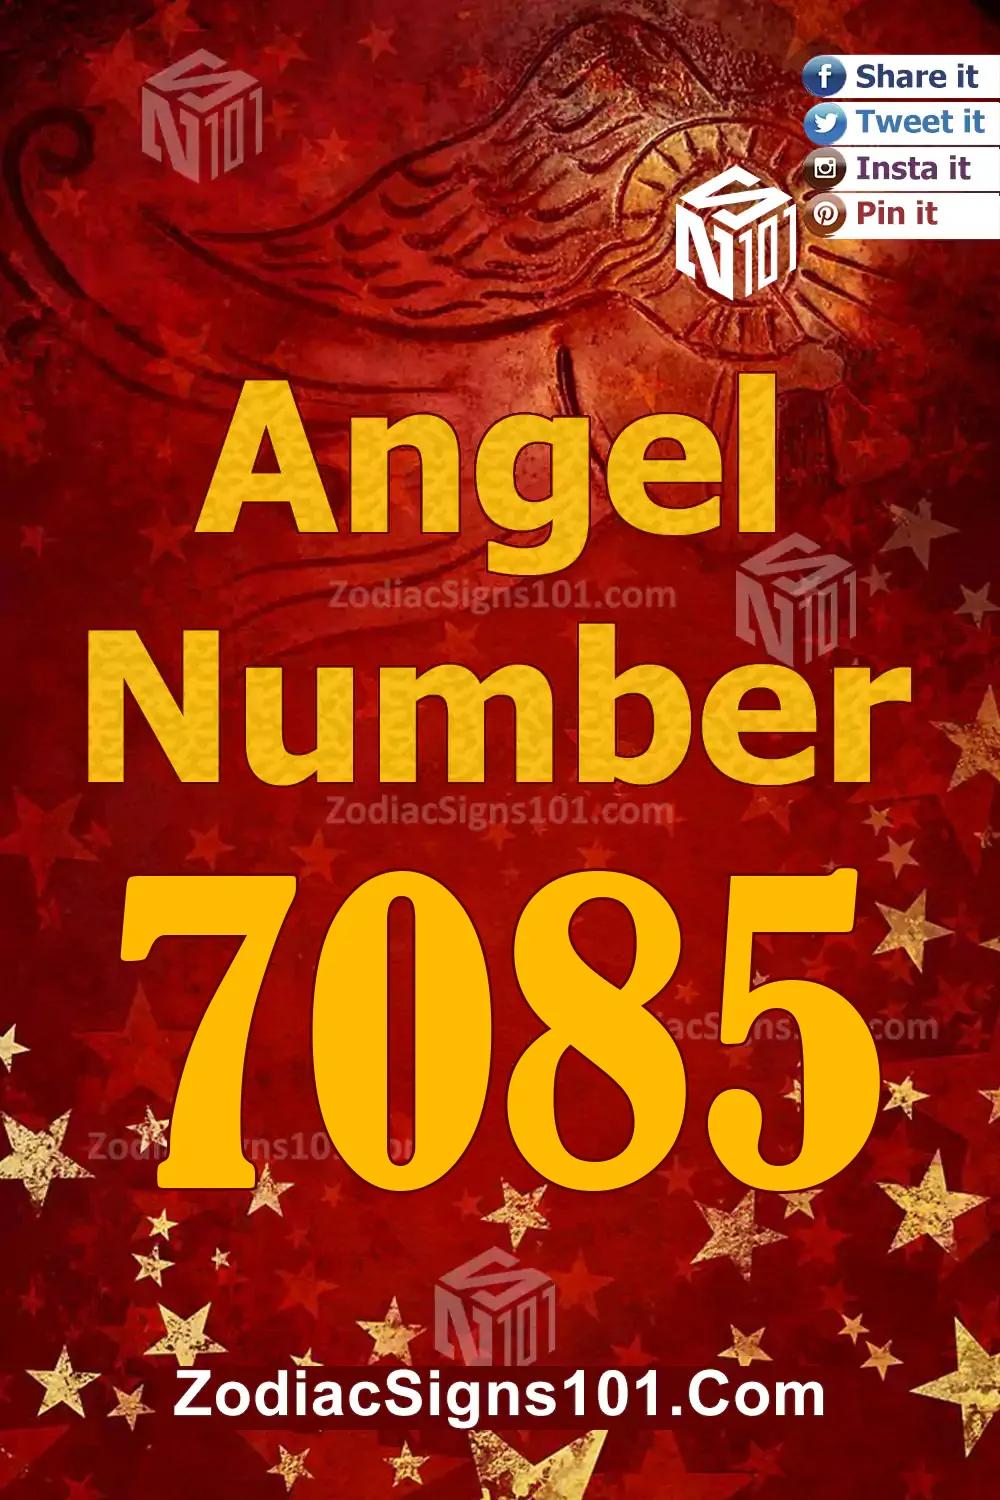 7085 Angel Number Meaning